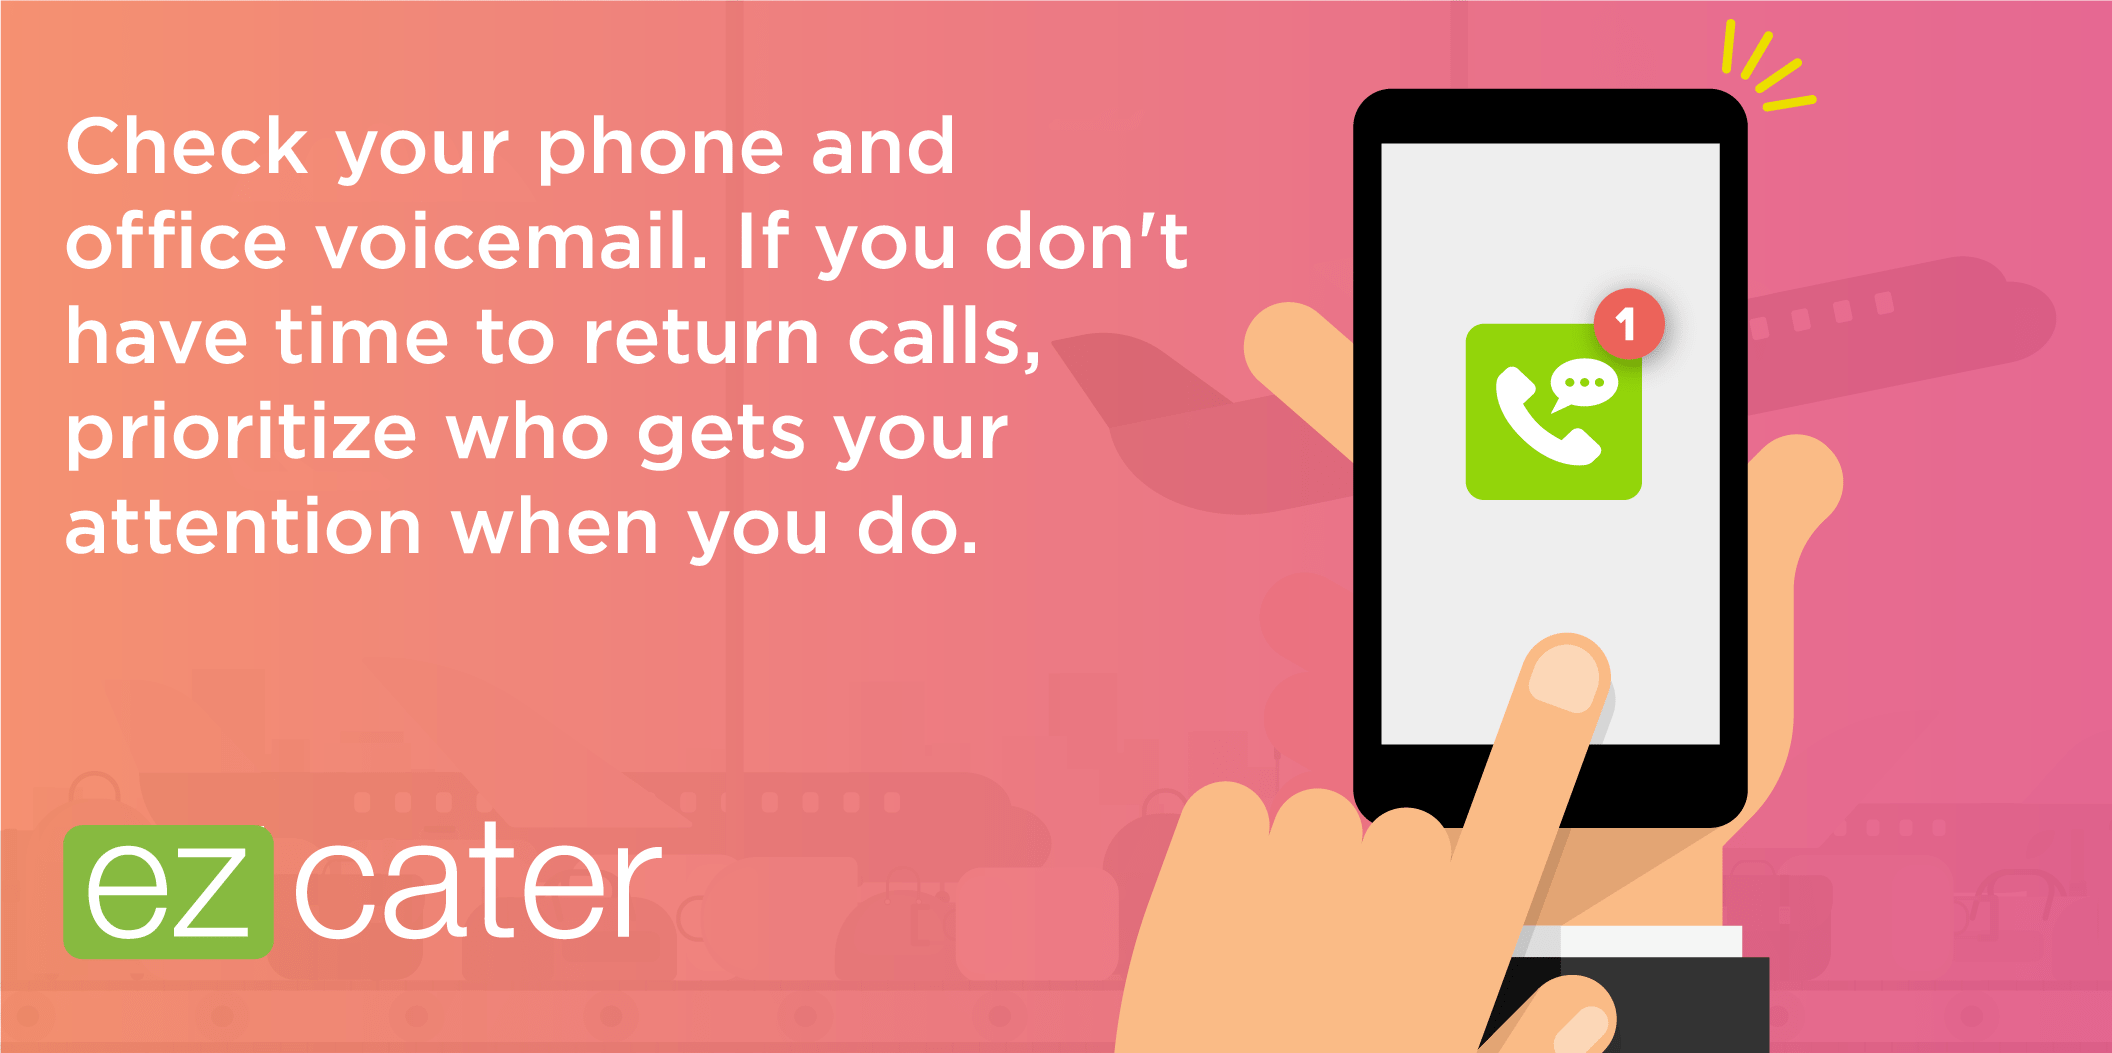 Check your phone and office voicemail.